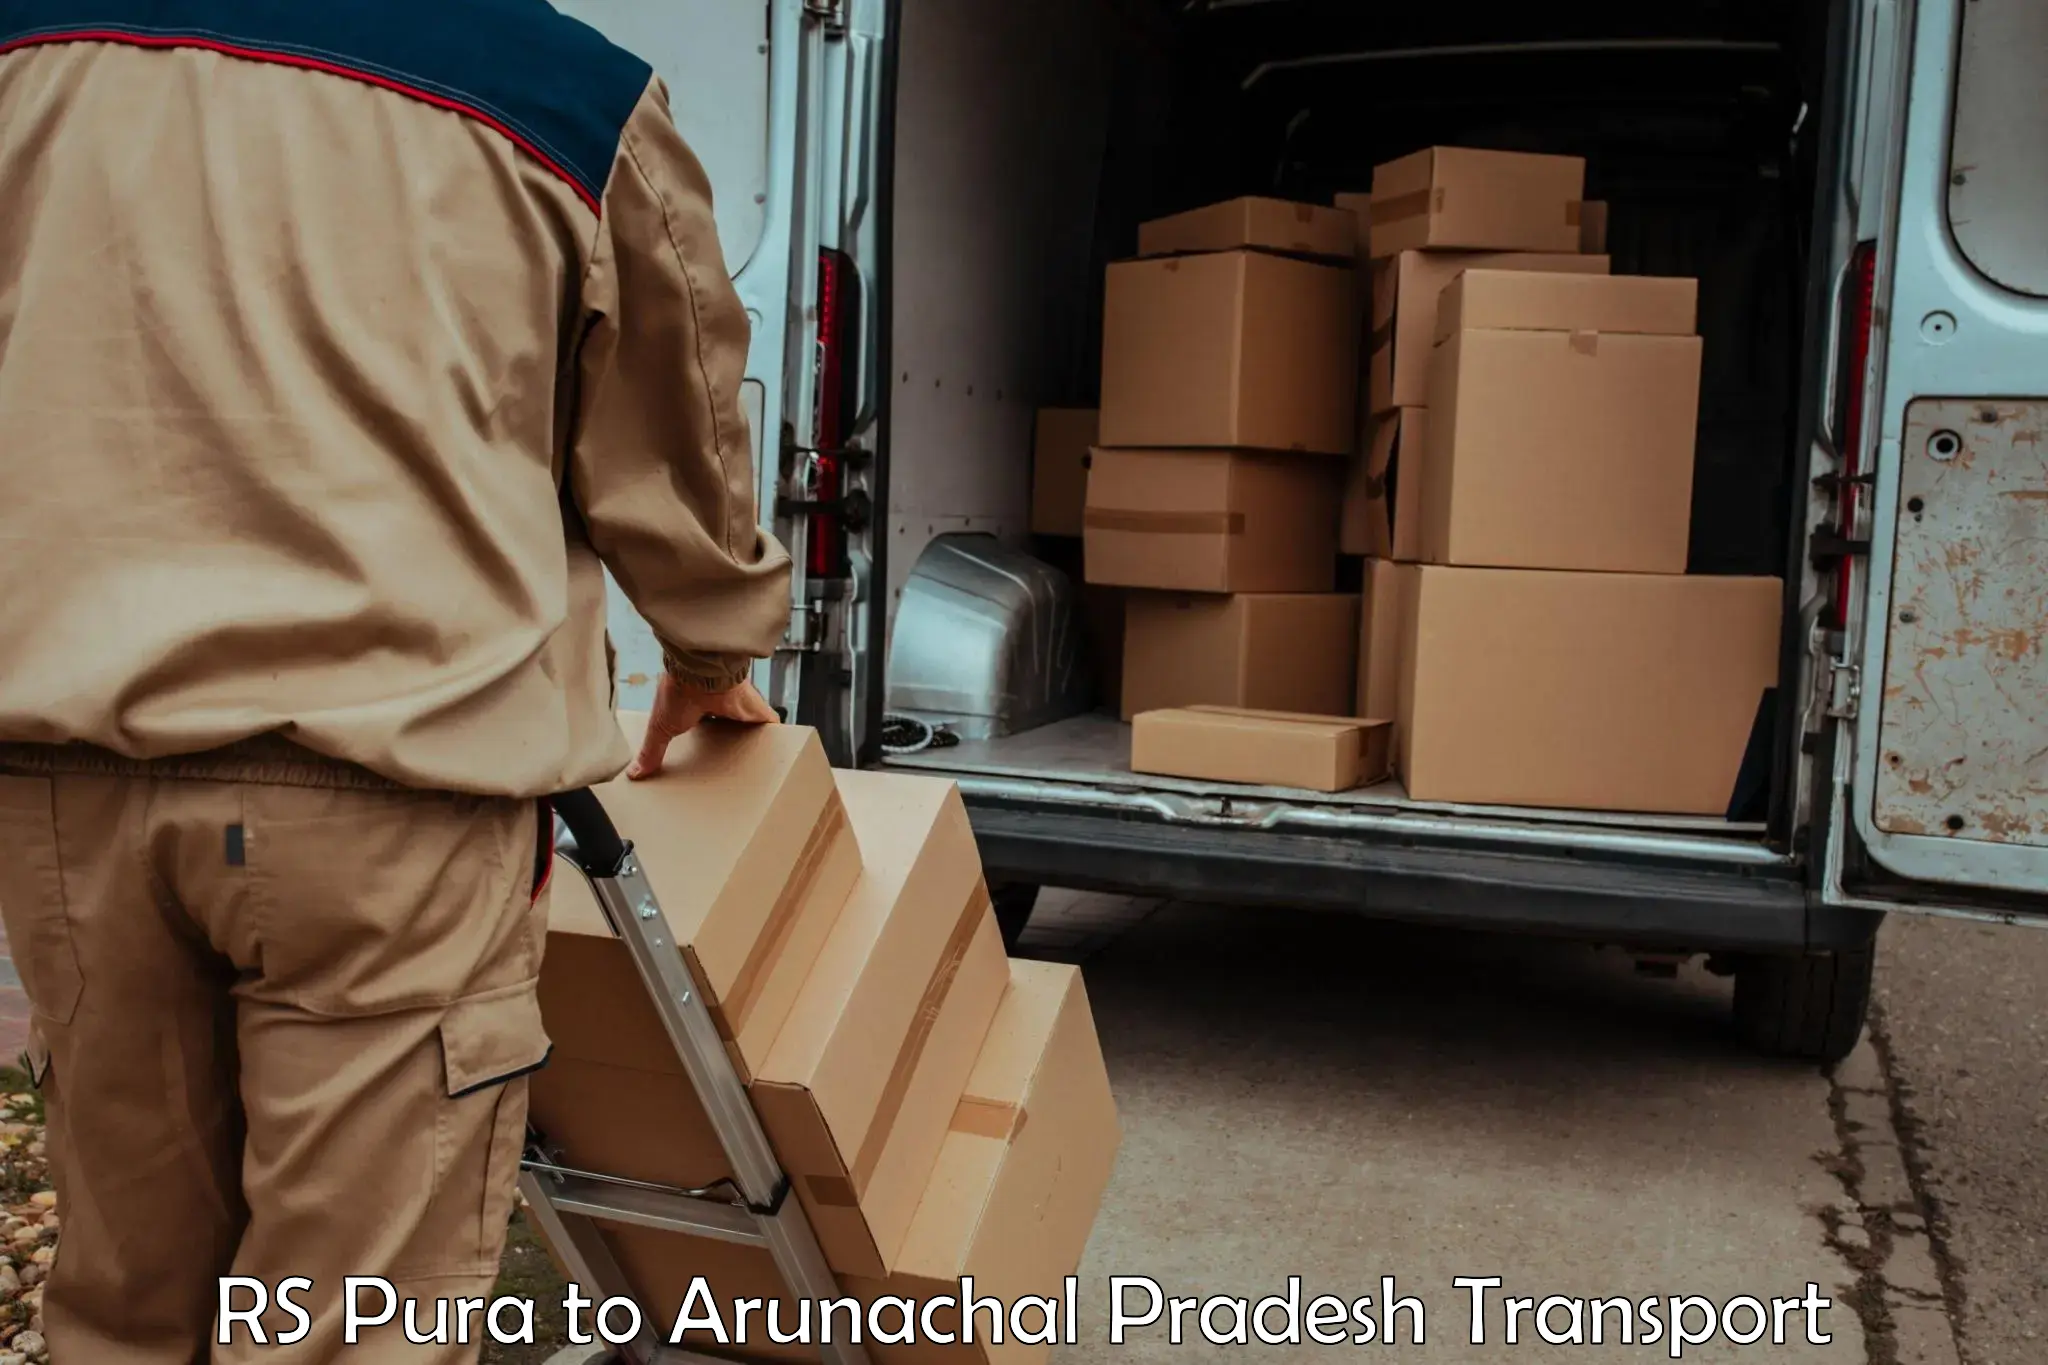 Parcel transport services RS Pura to Yingkiong